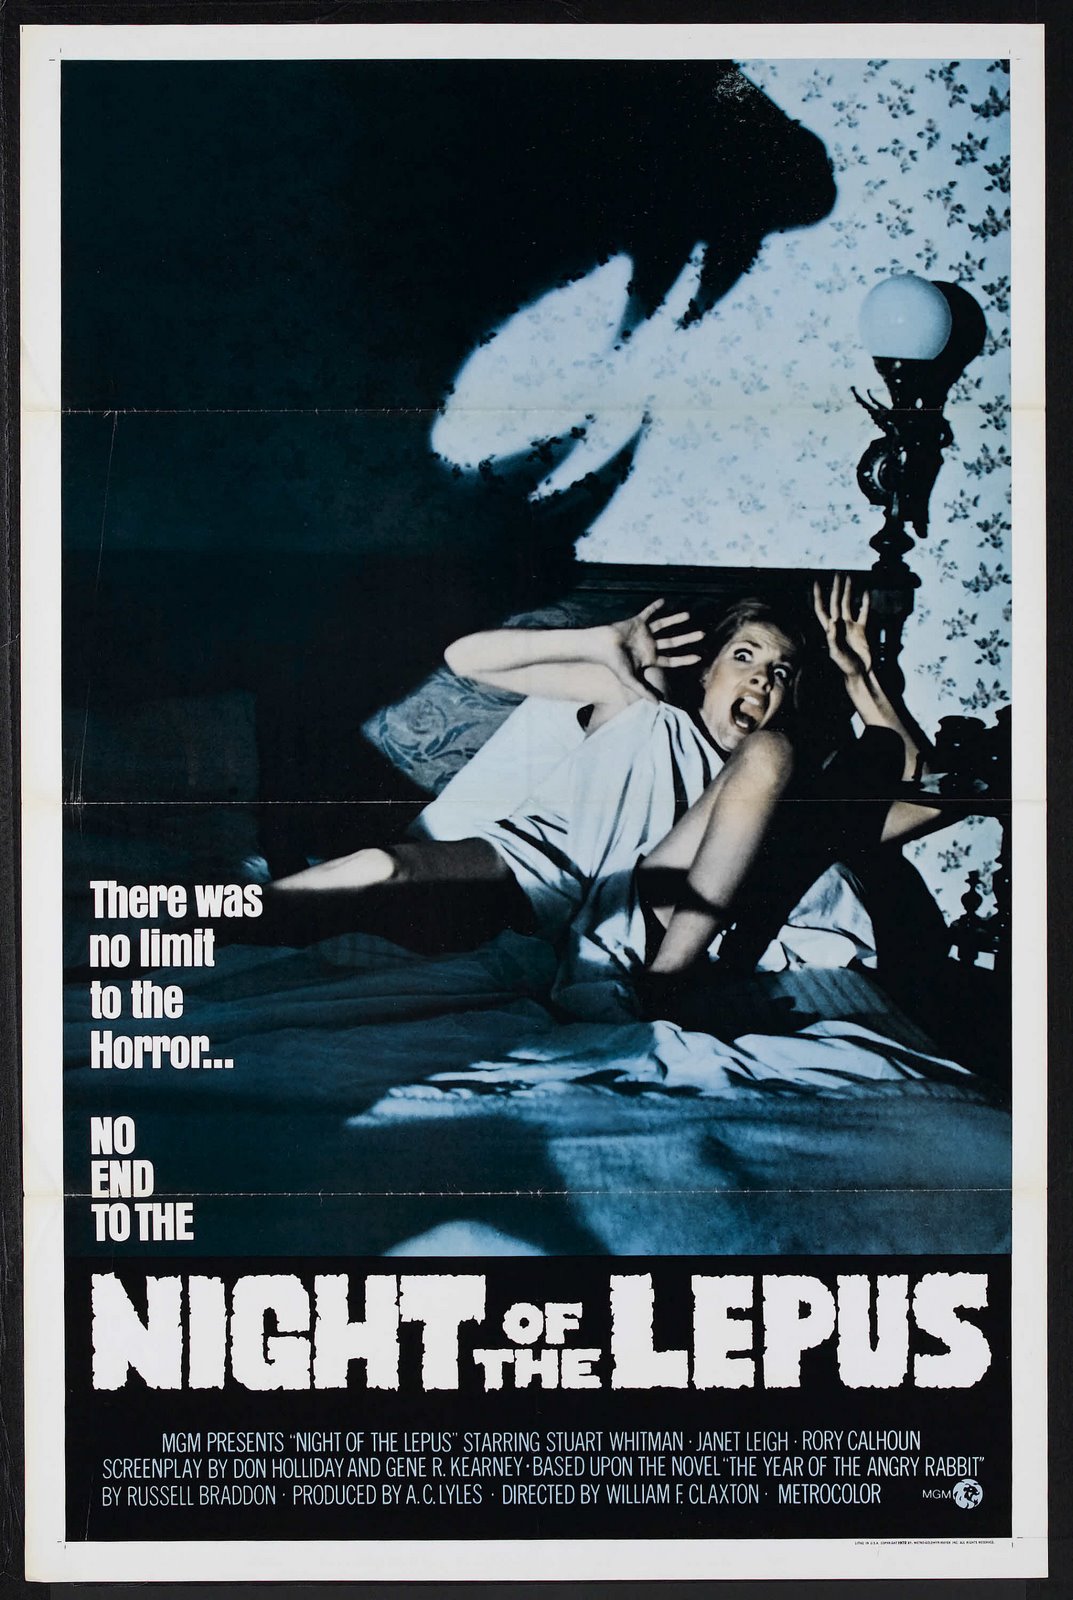 NIGHT OF THE LEPUS (1972) theatrical release poster